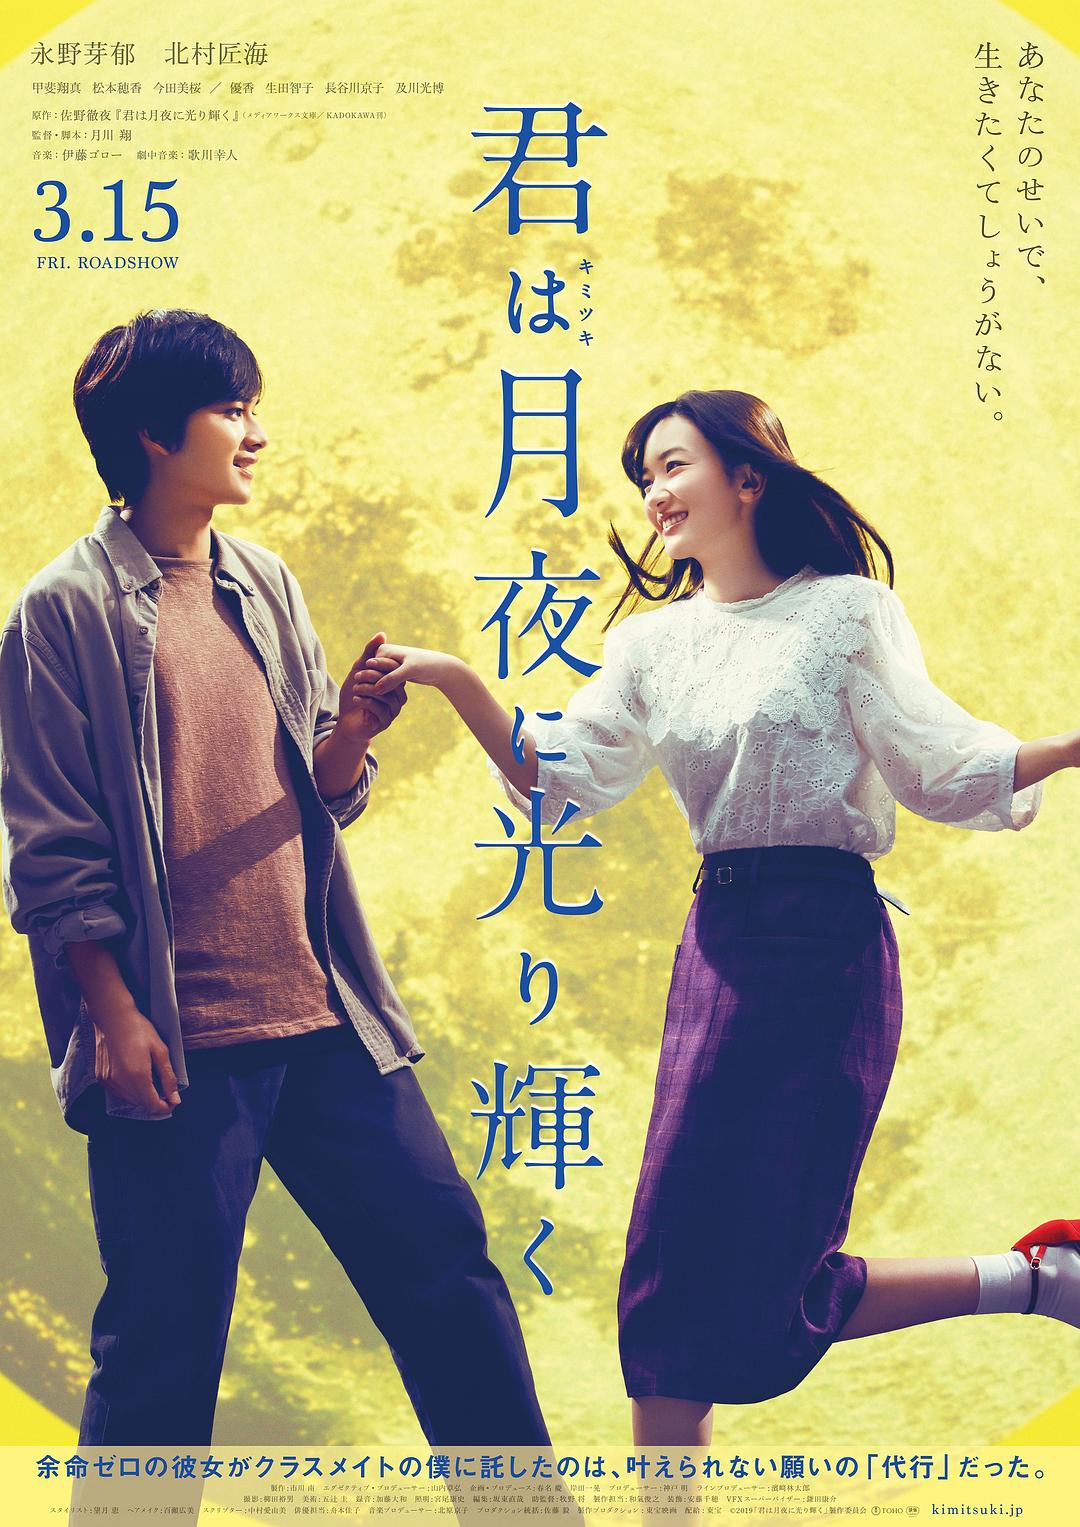 ҹҫ/ҹҫ You.Shine.in.The.Moonlight.2019.JAPANESE.1080p.BluRay.x264-i-1.png